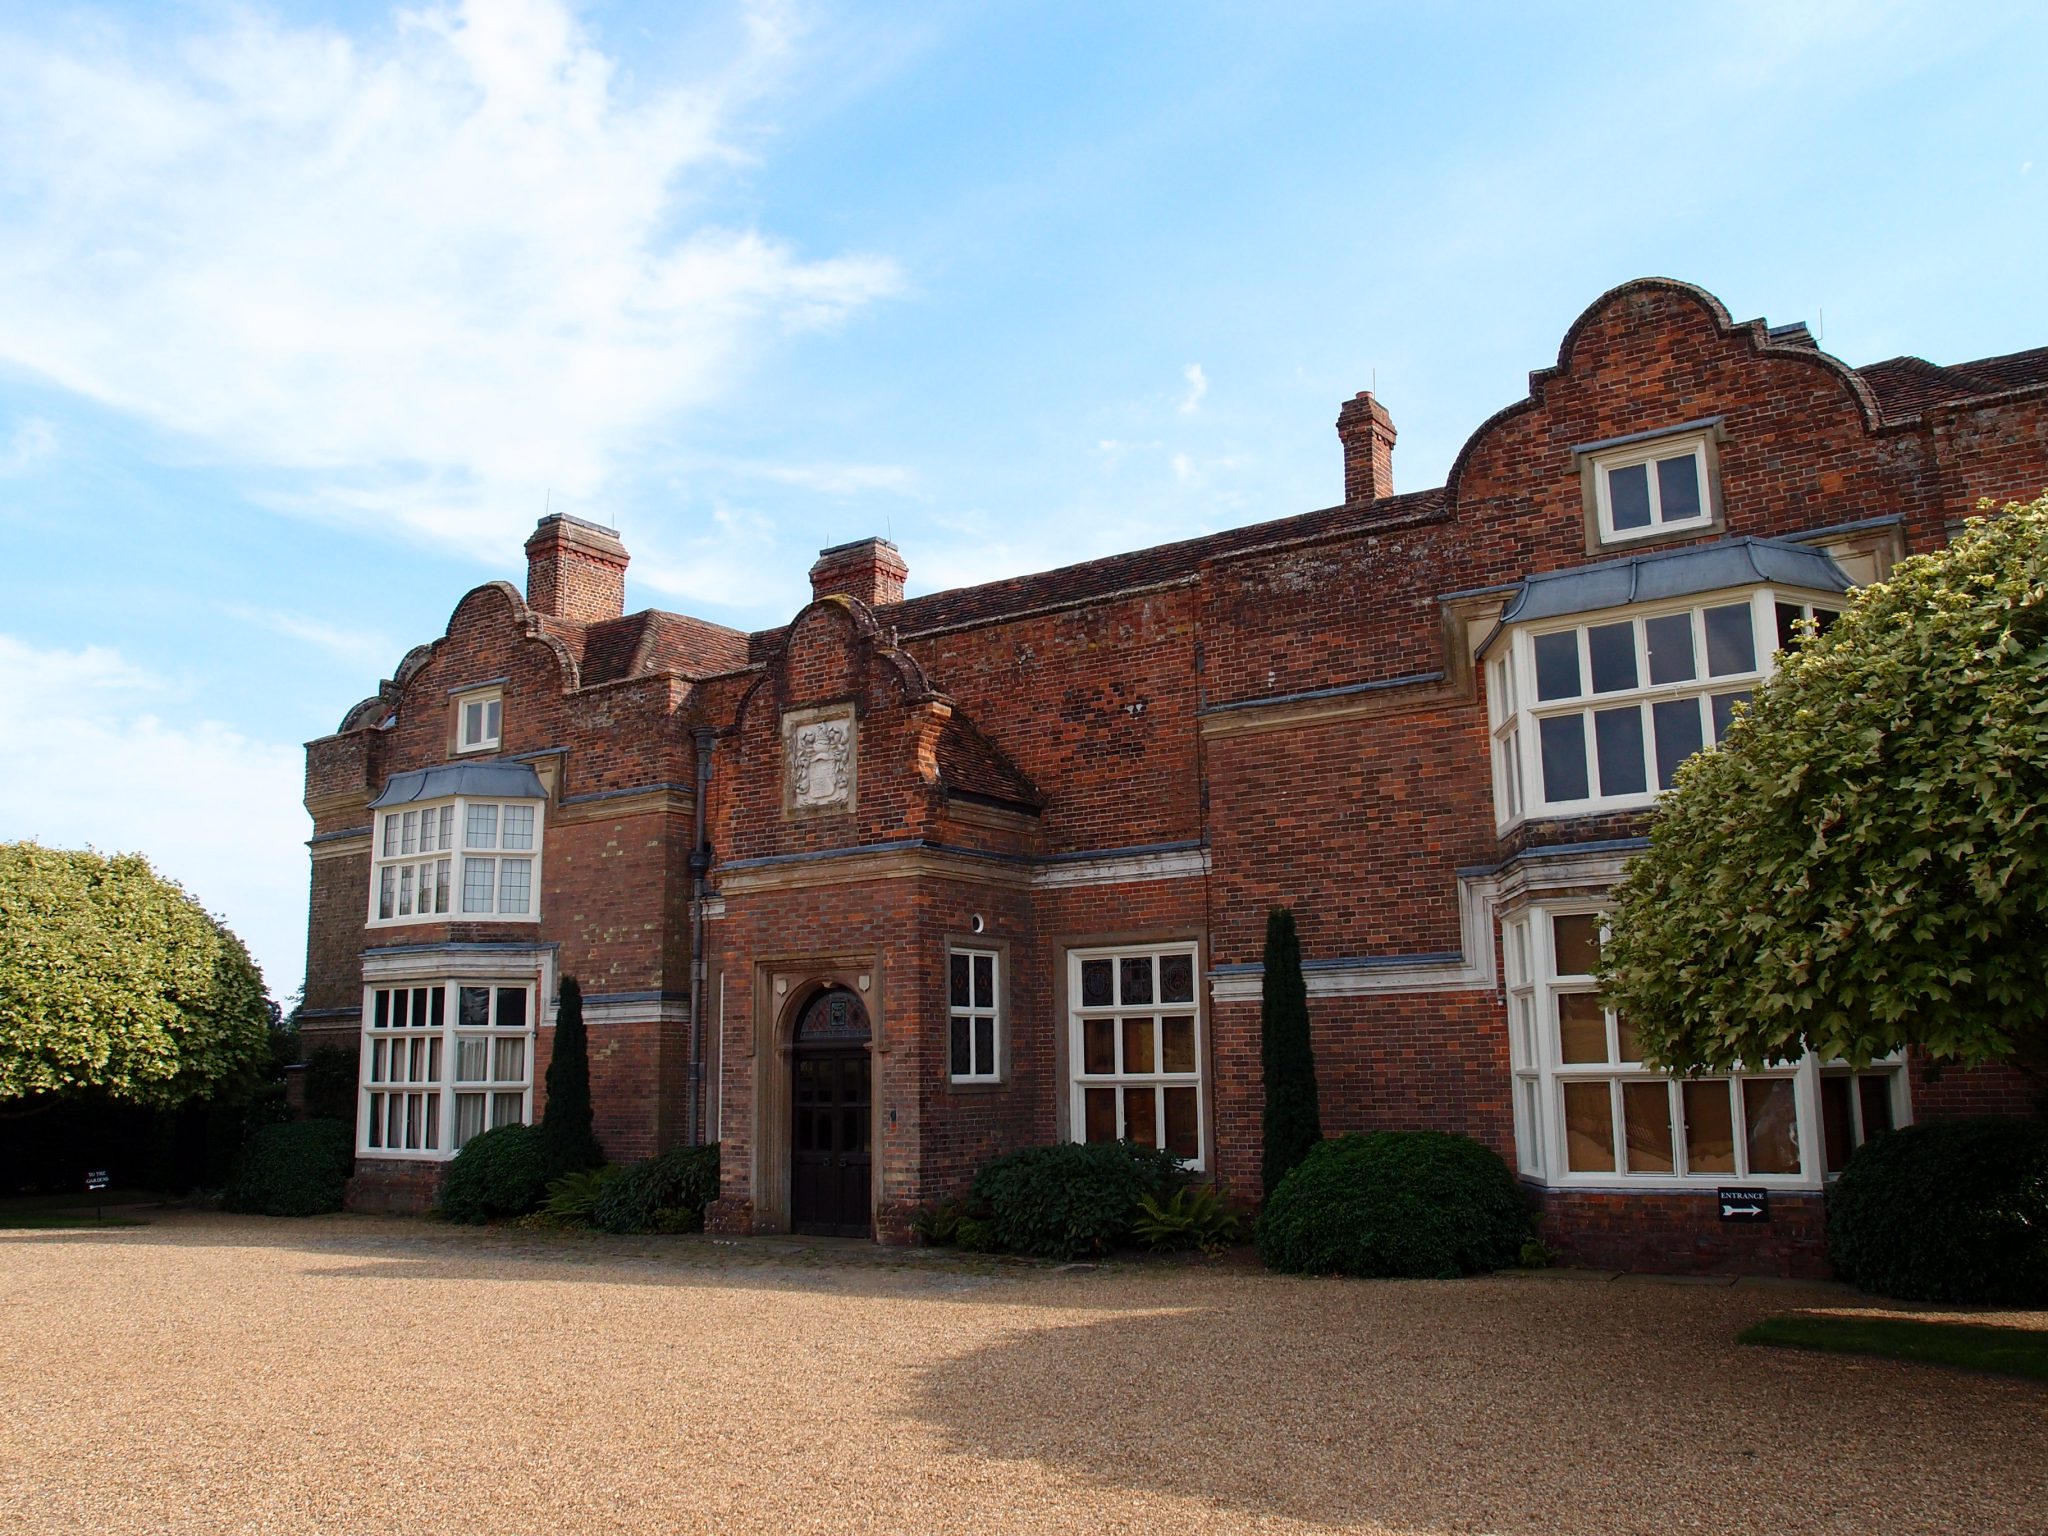 The North Front of the House. Behind this Jacobean exterior, which dates from about 1628, the medieval hall of the original timber-framed House, which was built in the 14th century, remains. As with all venerable English homes, layers upon layers of architectural styles co-exist at Godinton.